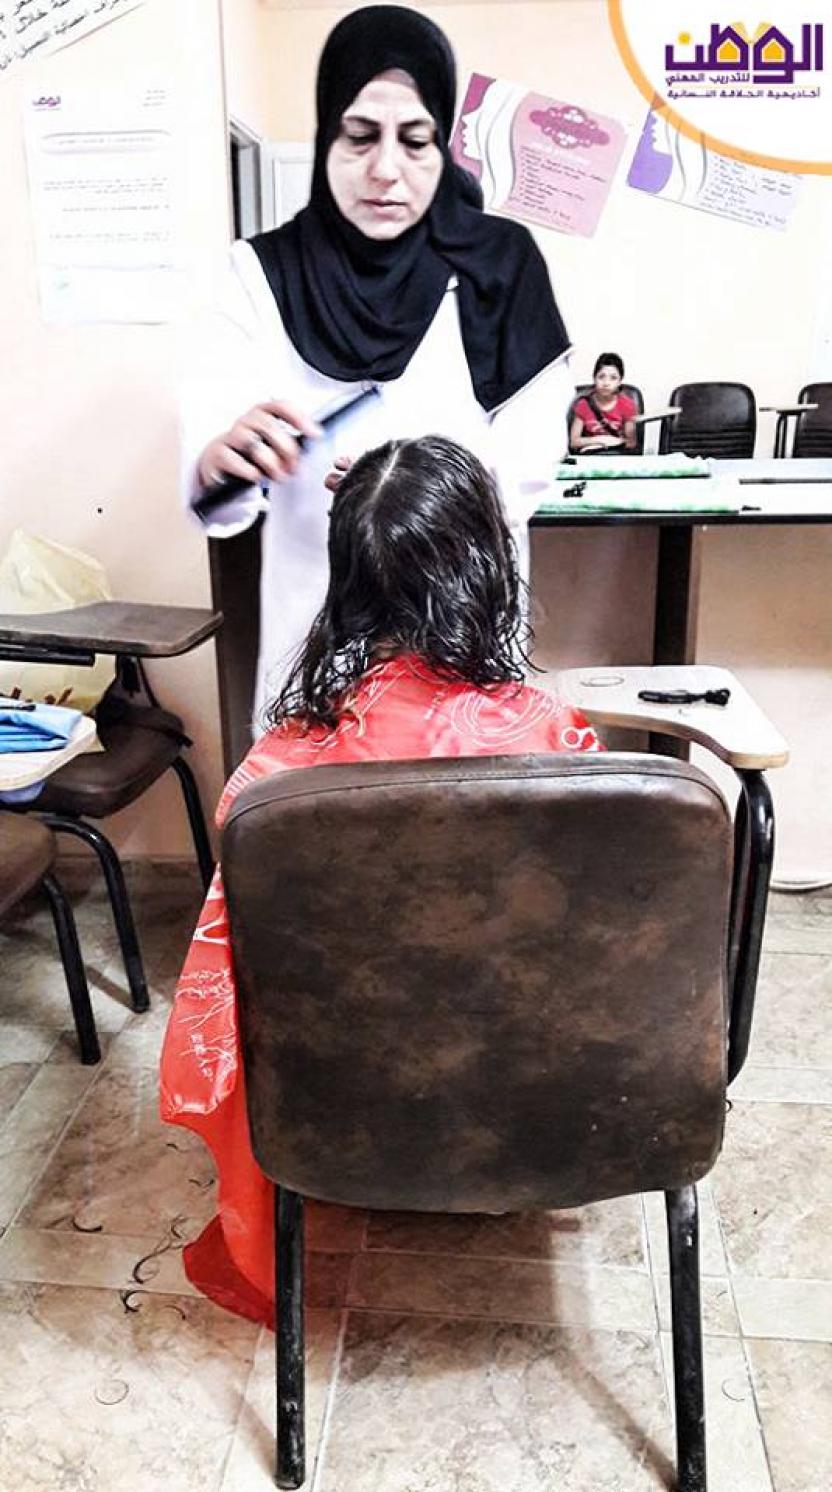 First phase test of hair cutting